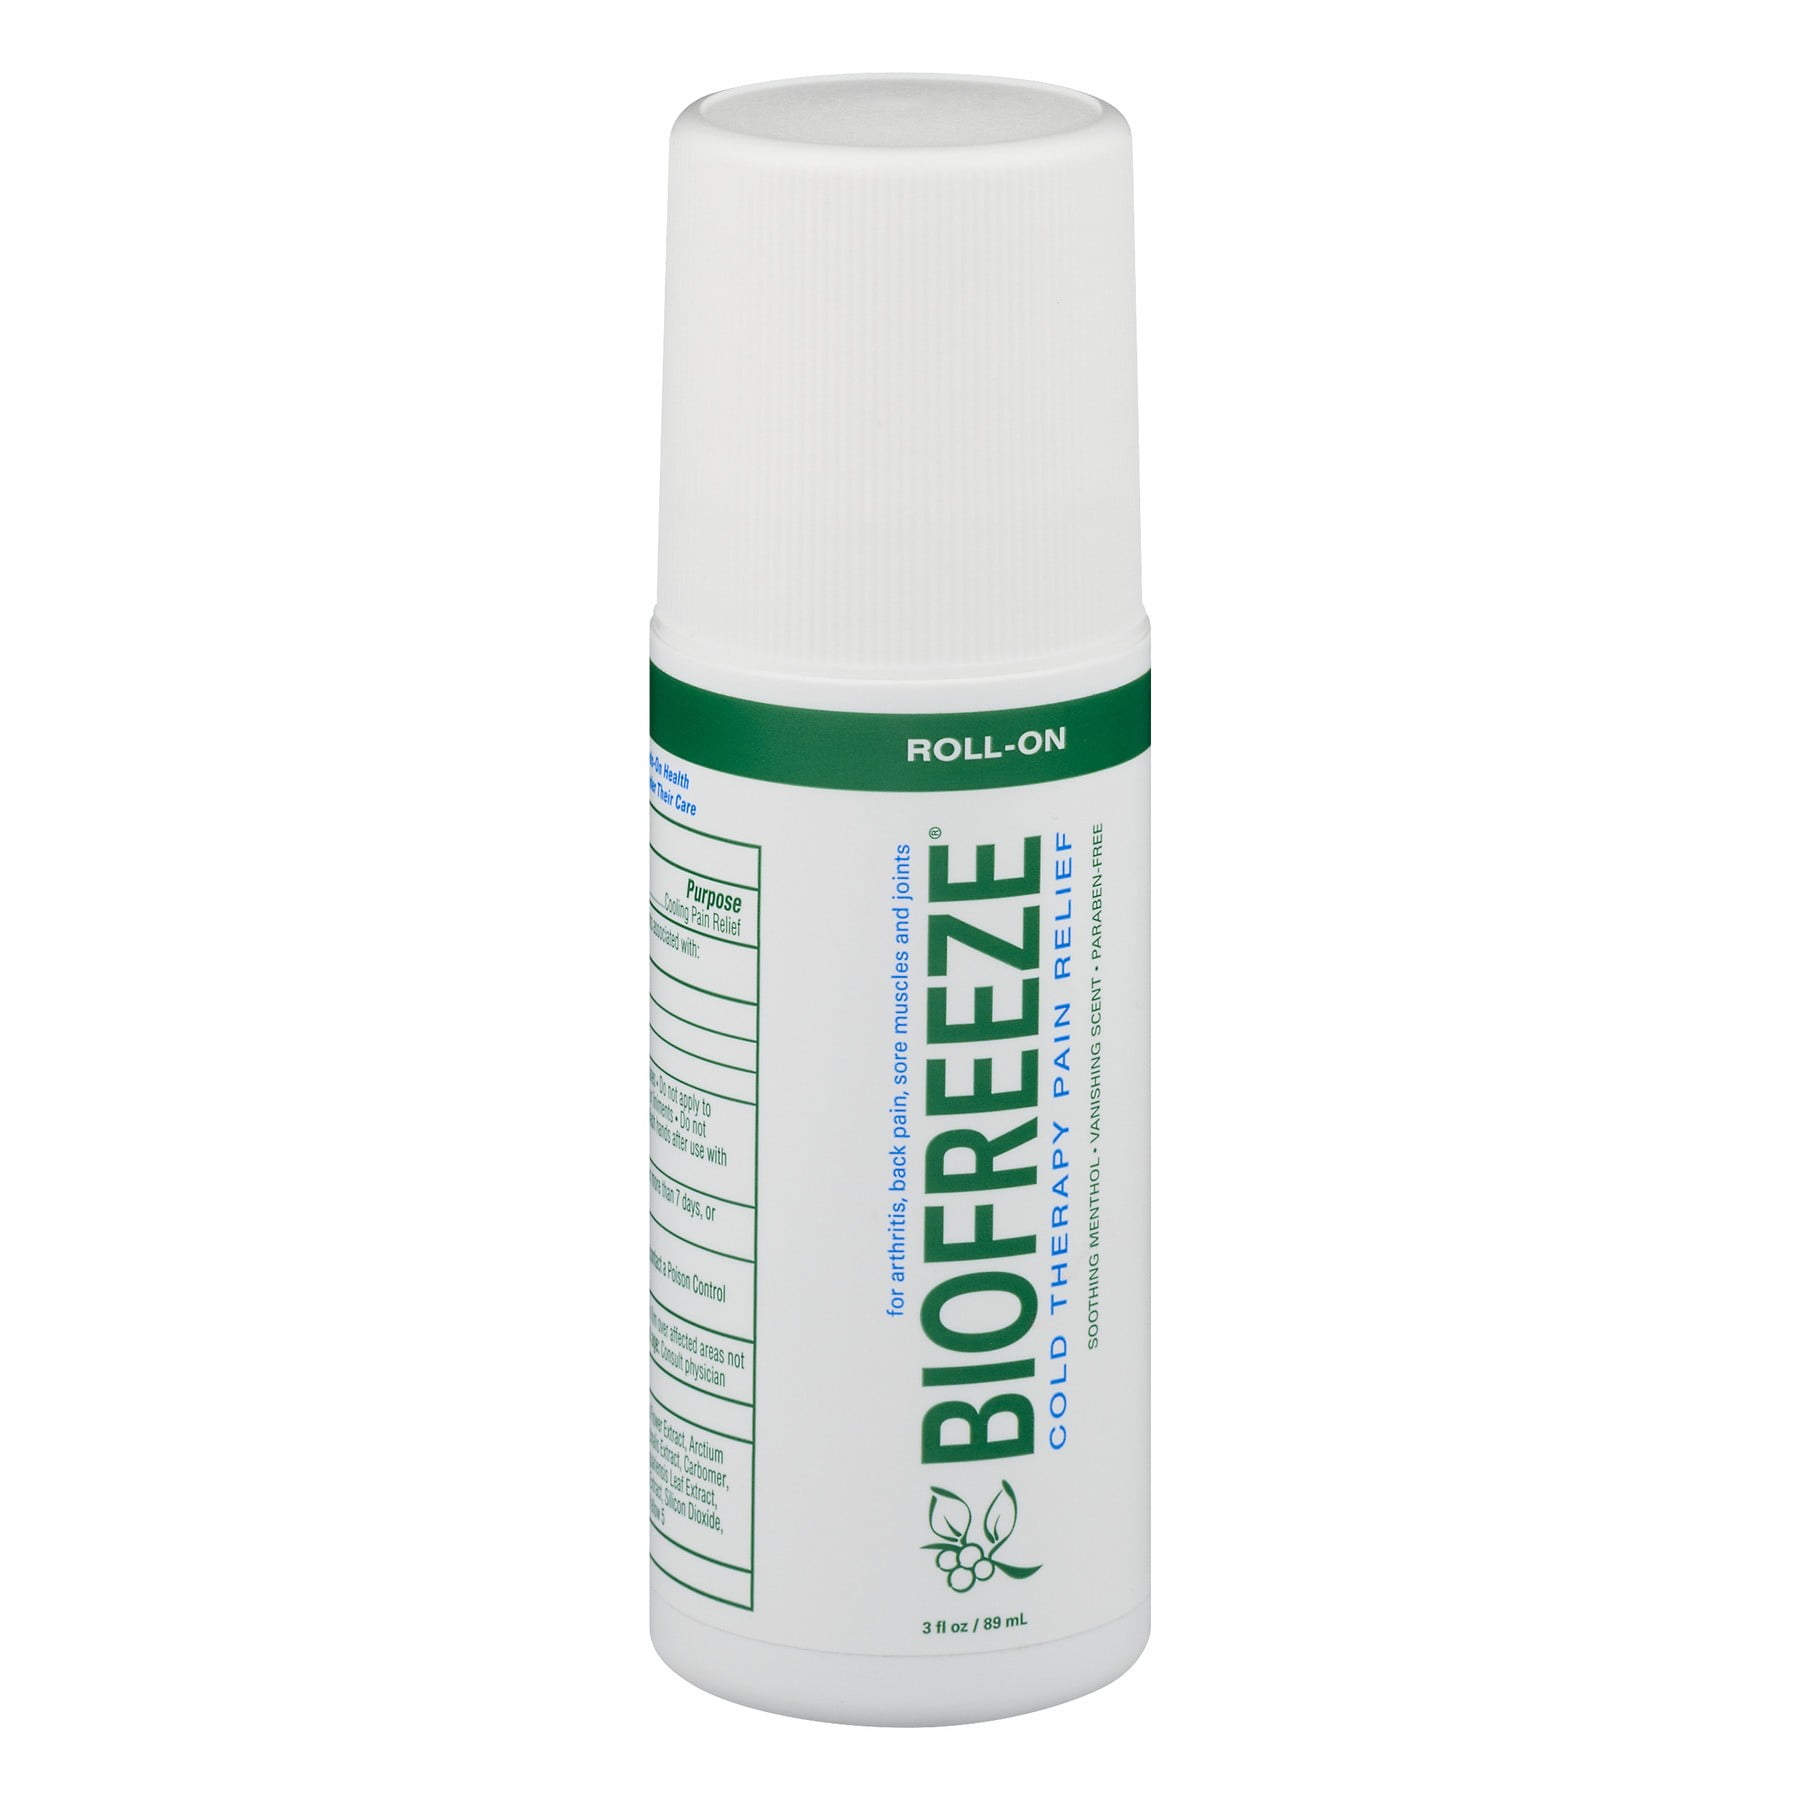 Biofreeze Roll On Cold Therapy Pain Relief Walmart Com Walmart Com